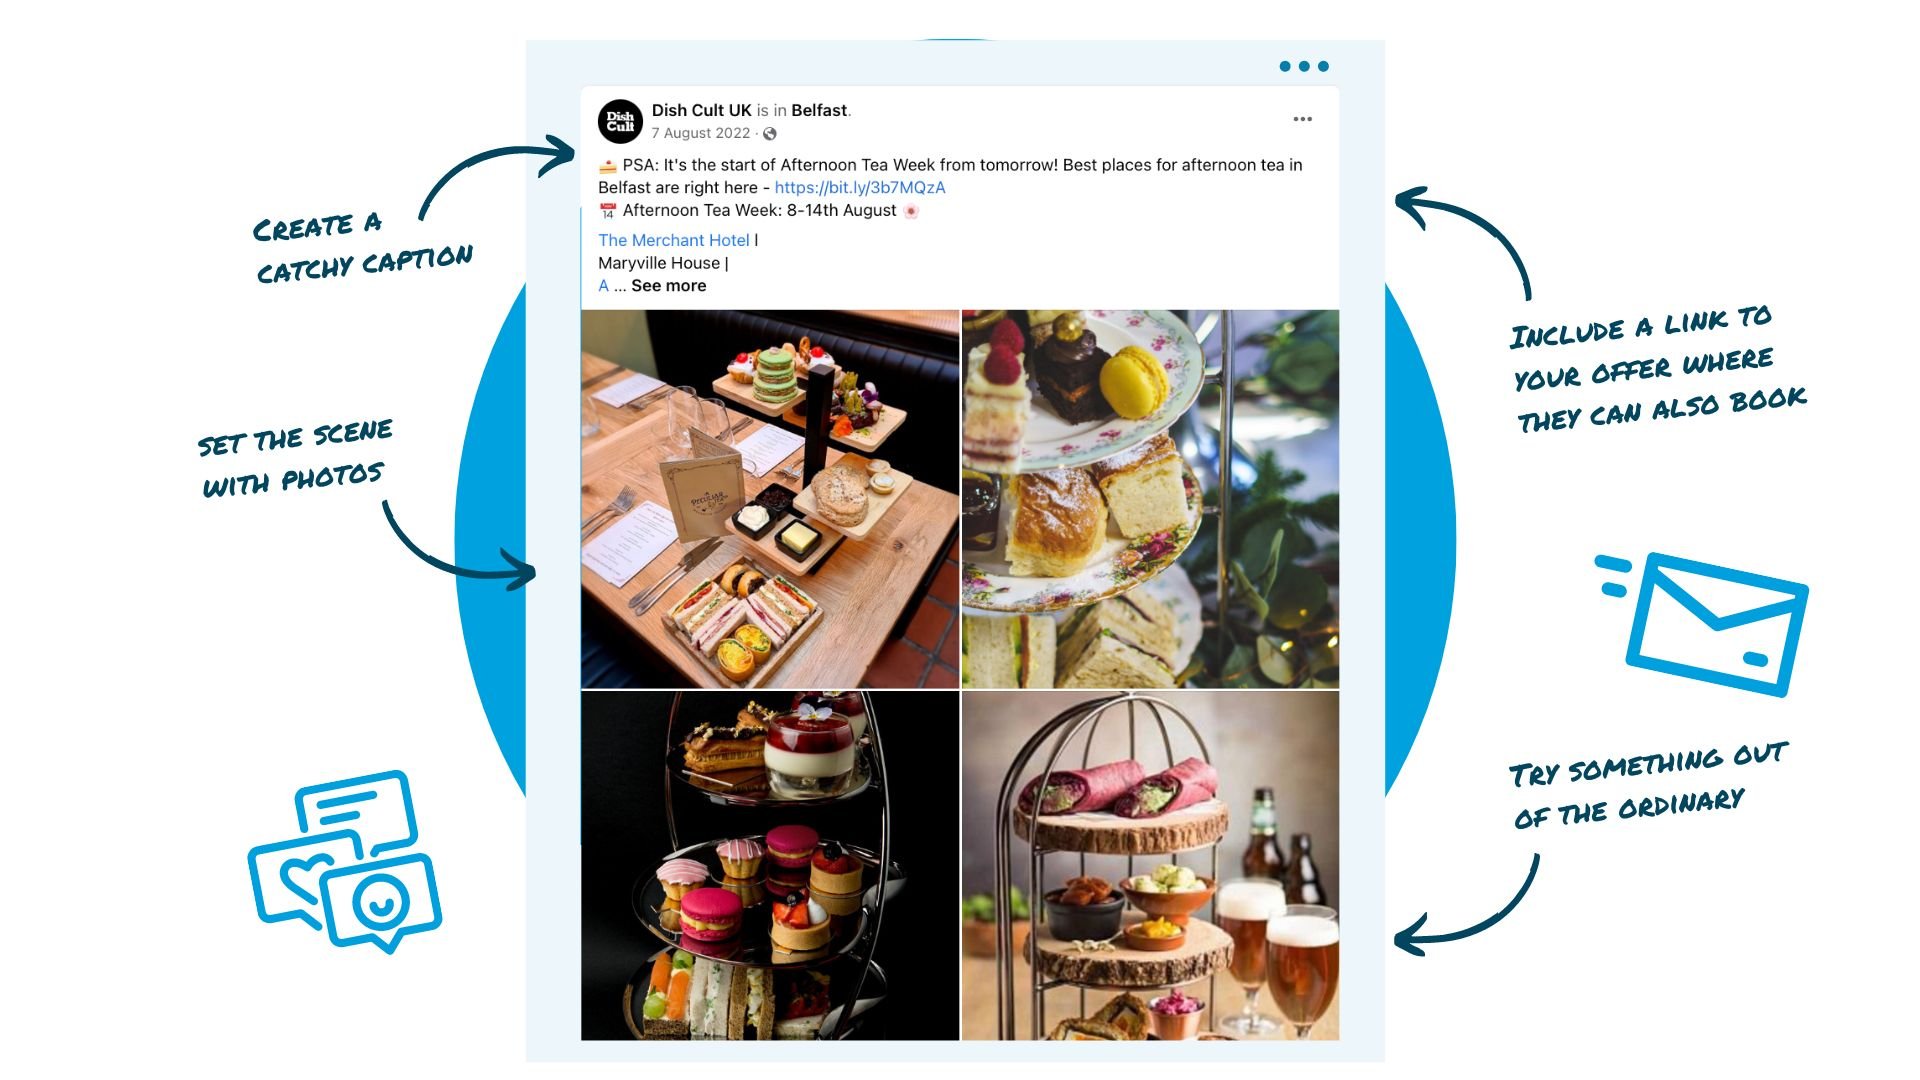 Diagram showing the key components of an afternoon tea promotion on social media and email